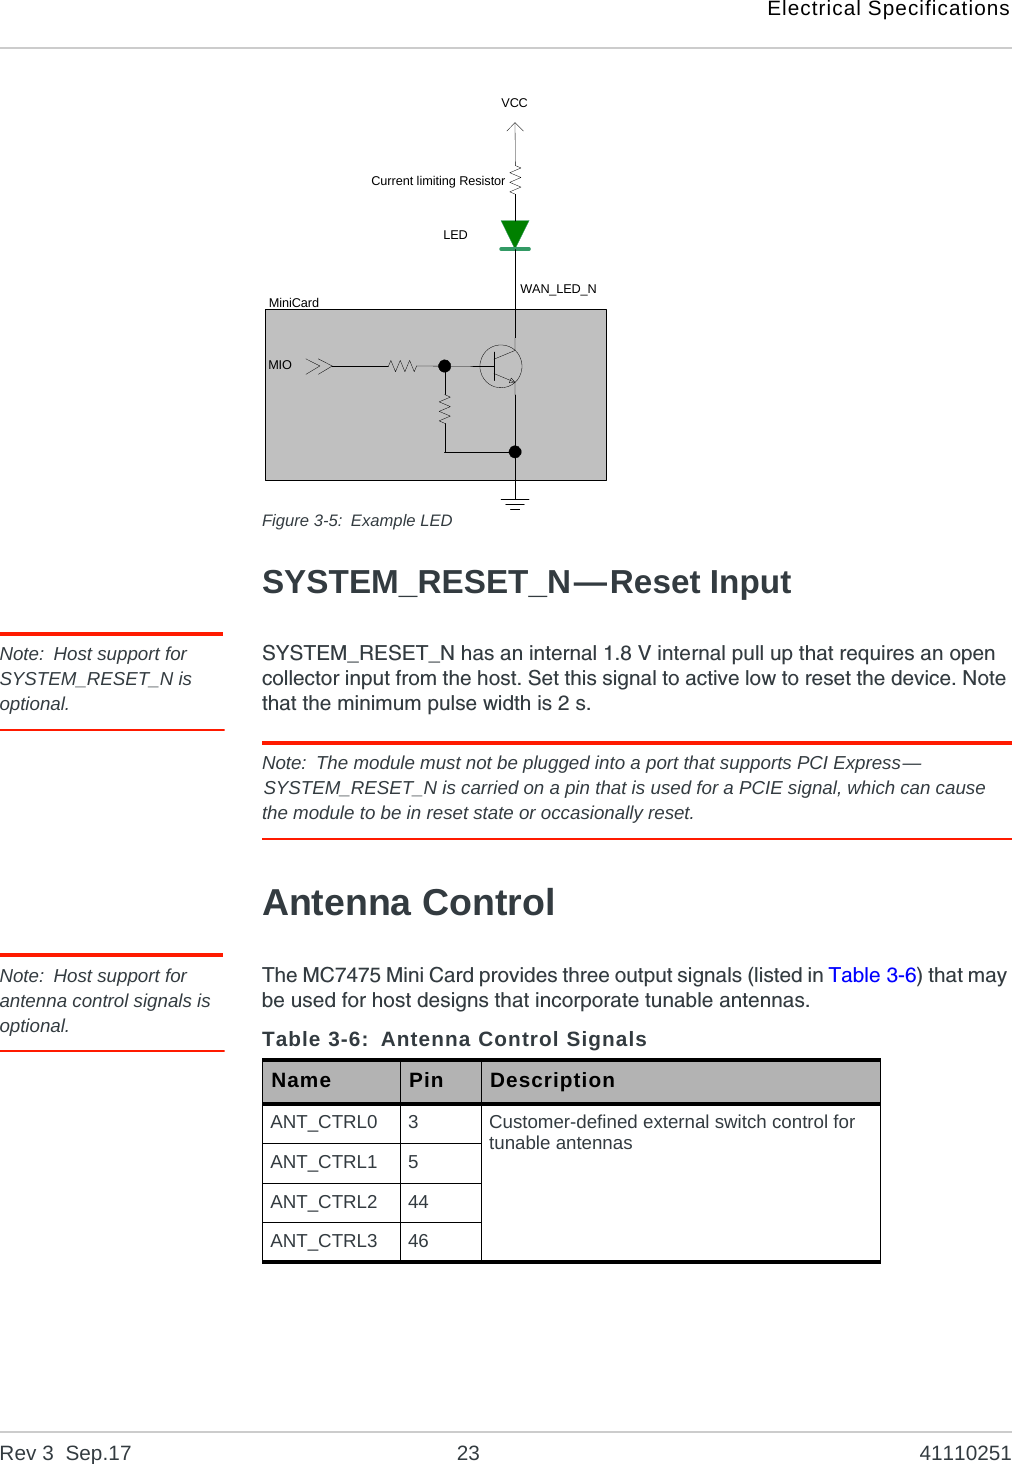 Electrical SpecificationsRev 3  Sep.17 23 41110251  Figure 3-5: Example LEDSYSTEM_RESET_N—Reset InputNote: Host support for SYSTEM_RESET_N is optional.SYSTEM_RESET_N has an internal 1.8 V internal pull up that requires an open collector input from the host. Set this signal to active low to reset the device. Note that the minimum pulse width is 2 s.Note: The module must not be plugged into a port that supports PCI Express—SYSTEM_RESET_N is carried on a pin that is used for a PCIE signal, which can cause the module to be in reset state or occasionally reset.Antenna ControlNote: Host support for antenna control signals is optional.The MC7475 Mini Card provides three output signals (listed in Table 3-6) that may be used for host designs that incorporate tunable antennas.Current limiting ResistorLEDVCCMIOMiniCard WAN_LED_NTable 3-6: Antenna Control SignalsName Pin DescriptionANT_CTRL0 3Customer-defined external switch control for tunable antennasANT_CTRL1 5ANT_CTRL2 44ANT_CTRL3 46